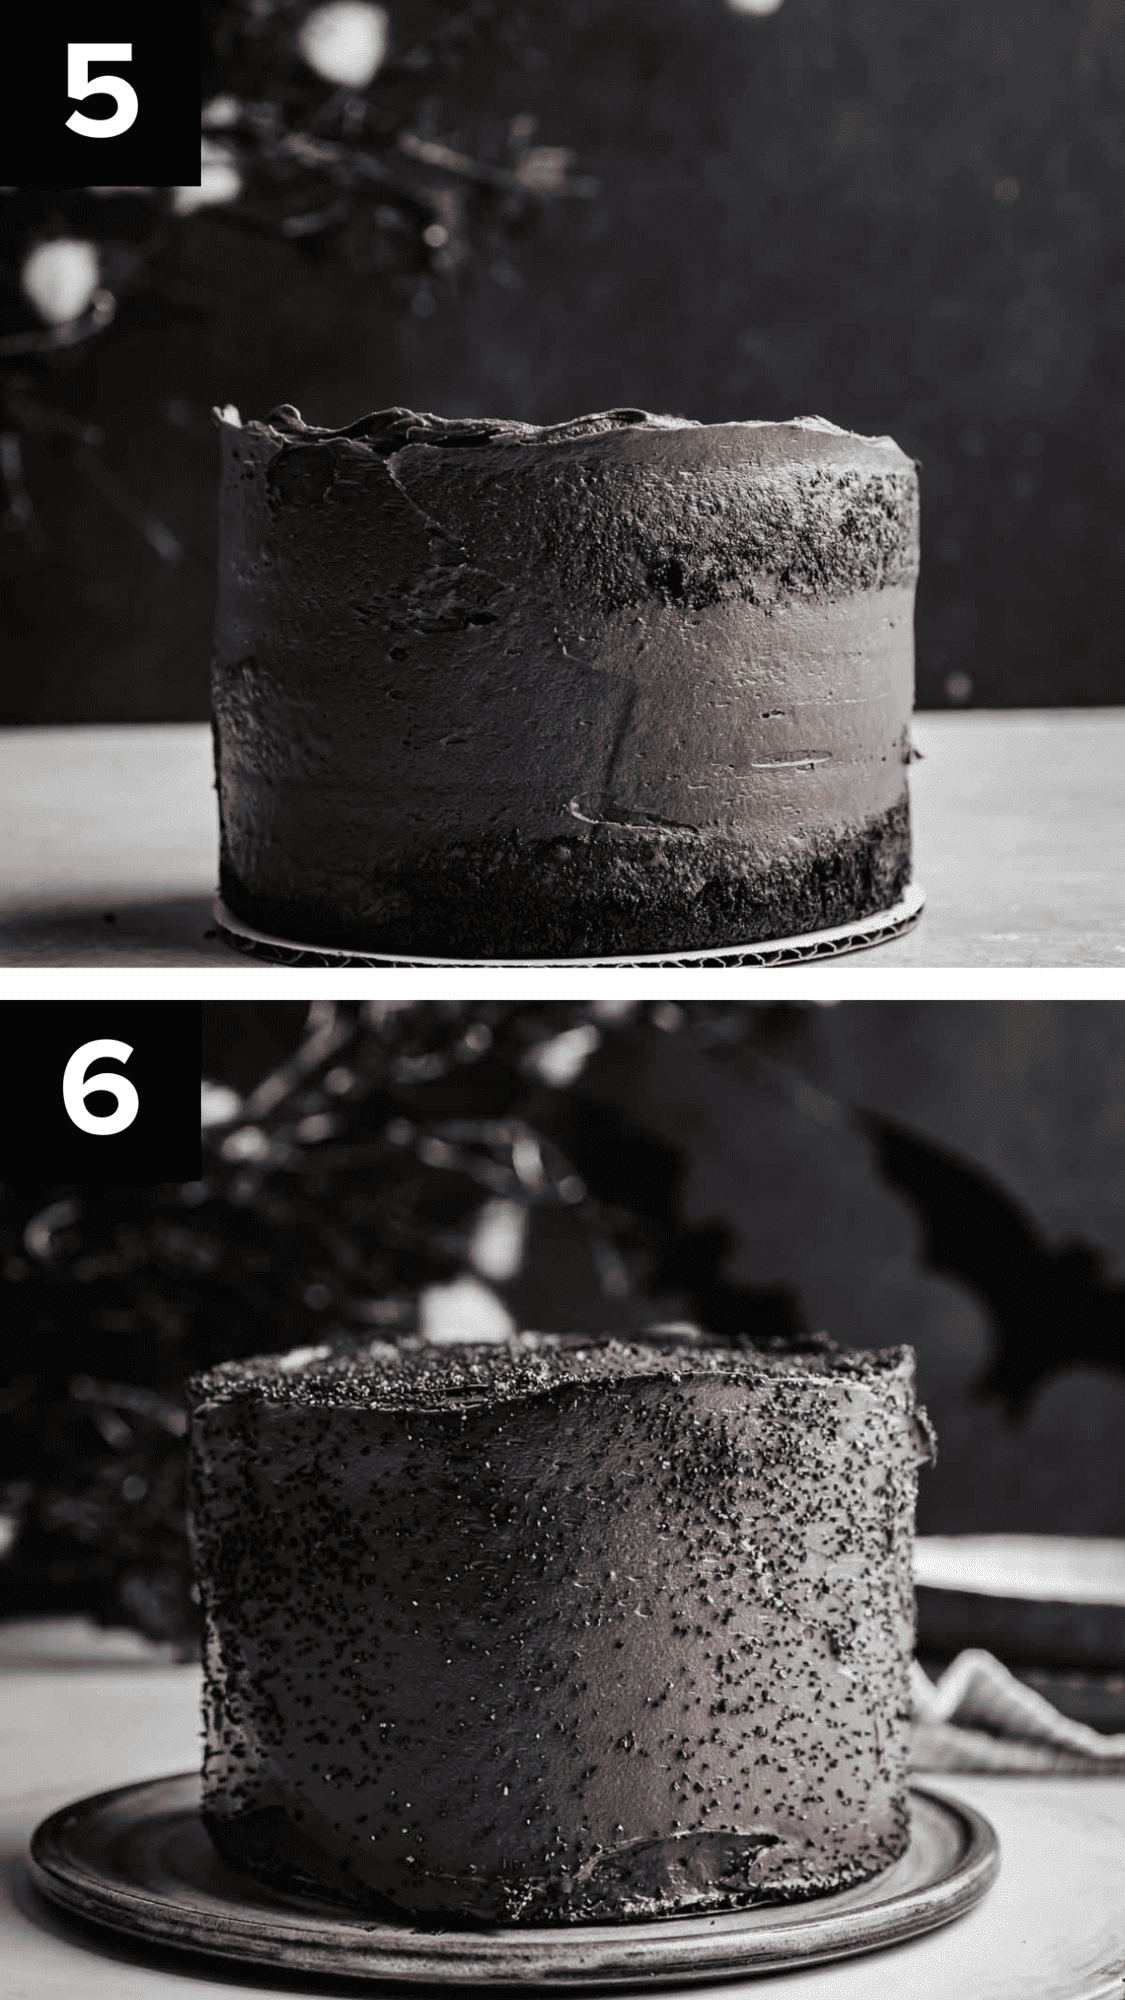 Two photos, top photo is a crumb coated Black Velvet Cake against a black background, the bottom image is a Black Velvet Cake full frosted and covered with black sugar sprinkles against a black background.